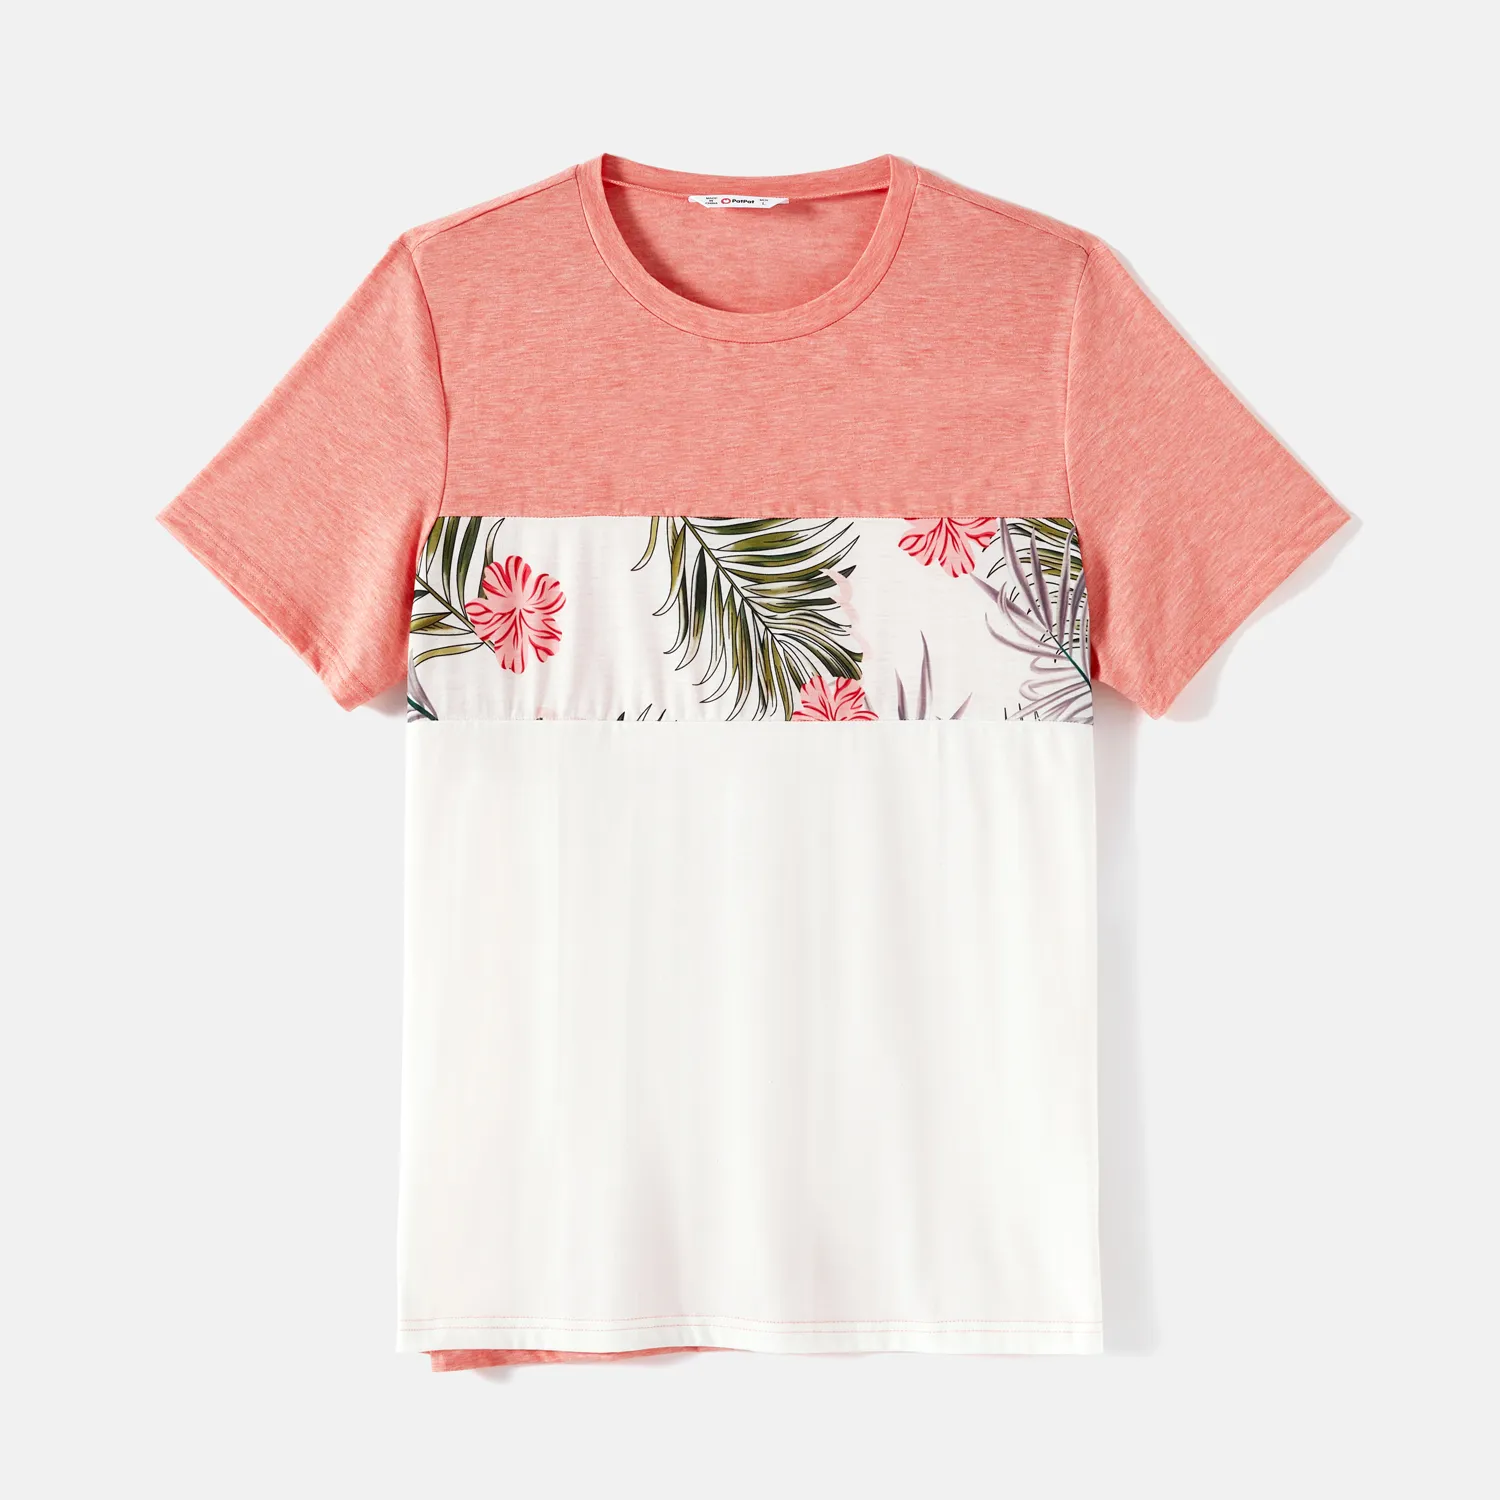 Family Matching Allover Plant Print Cami Dresses And Short-sleeve Colorblock Spliced T-shirts Sets